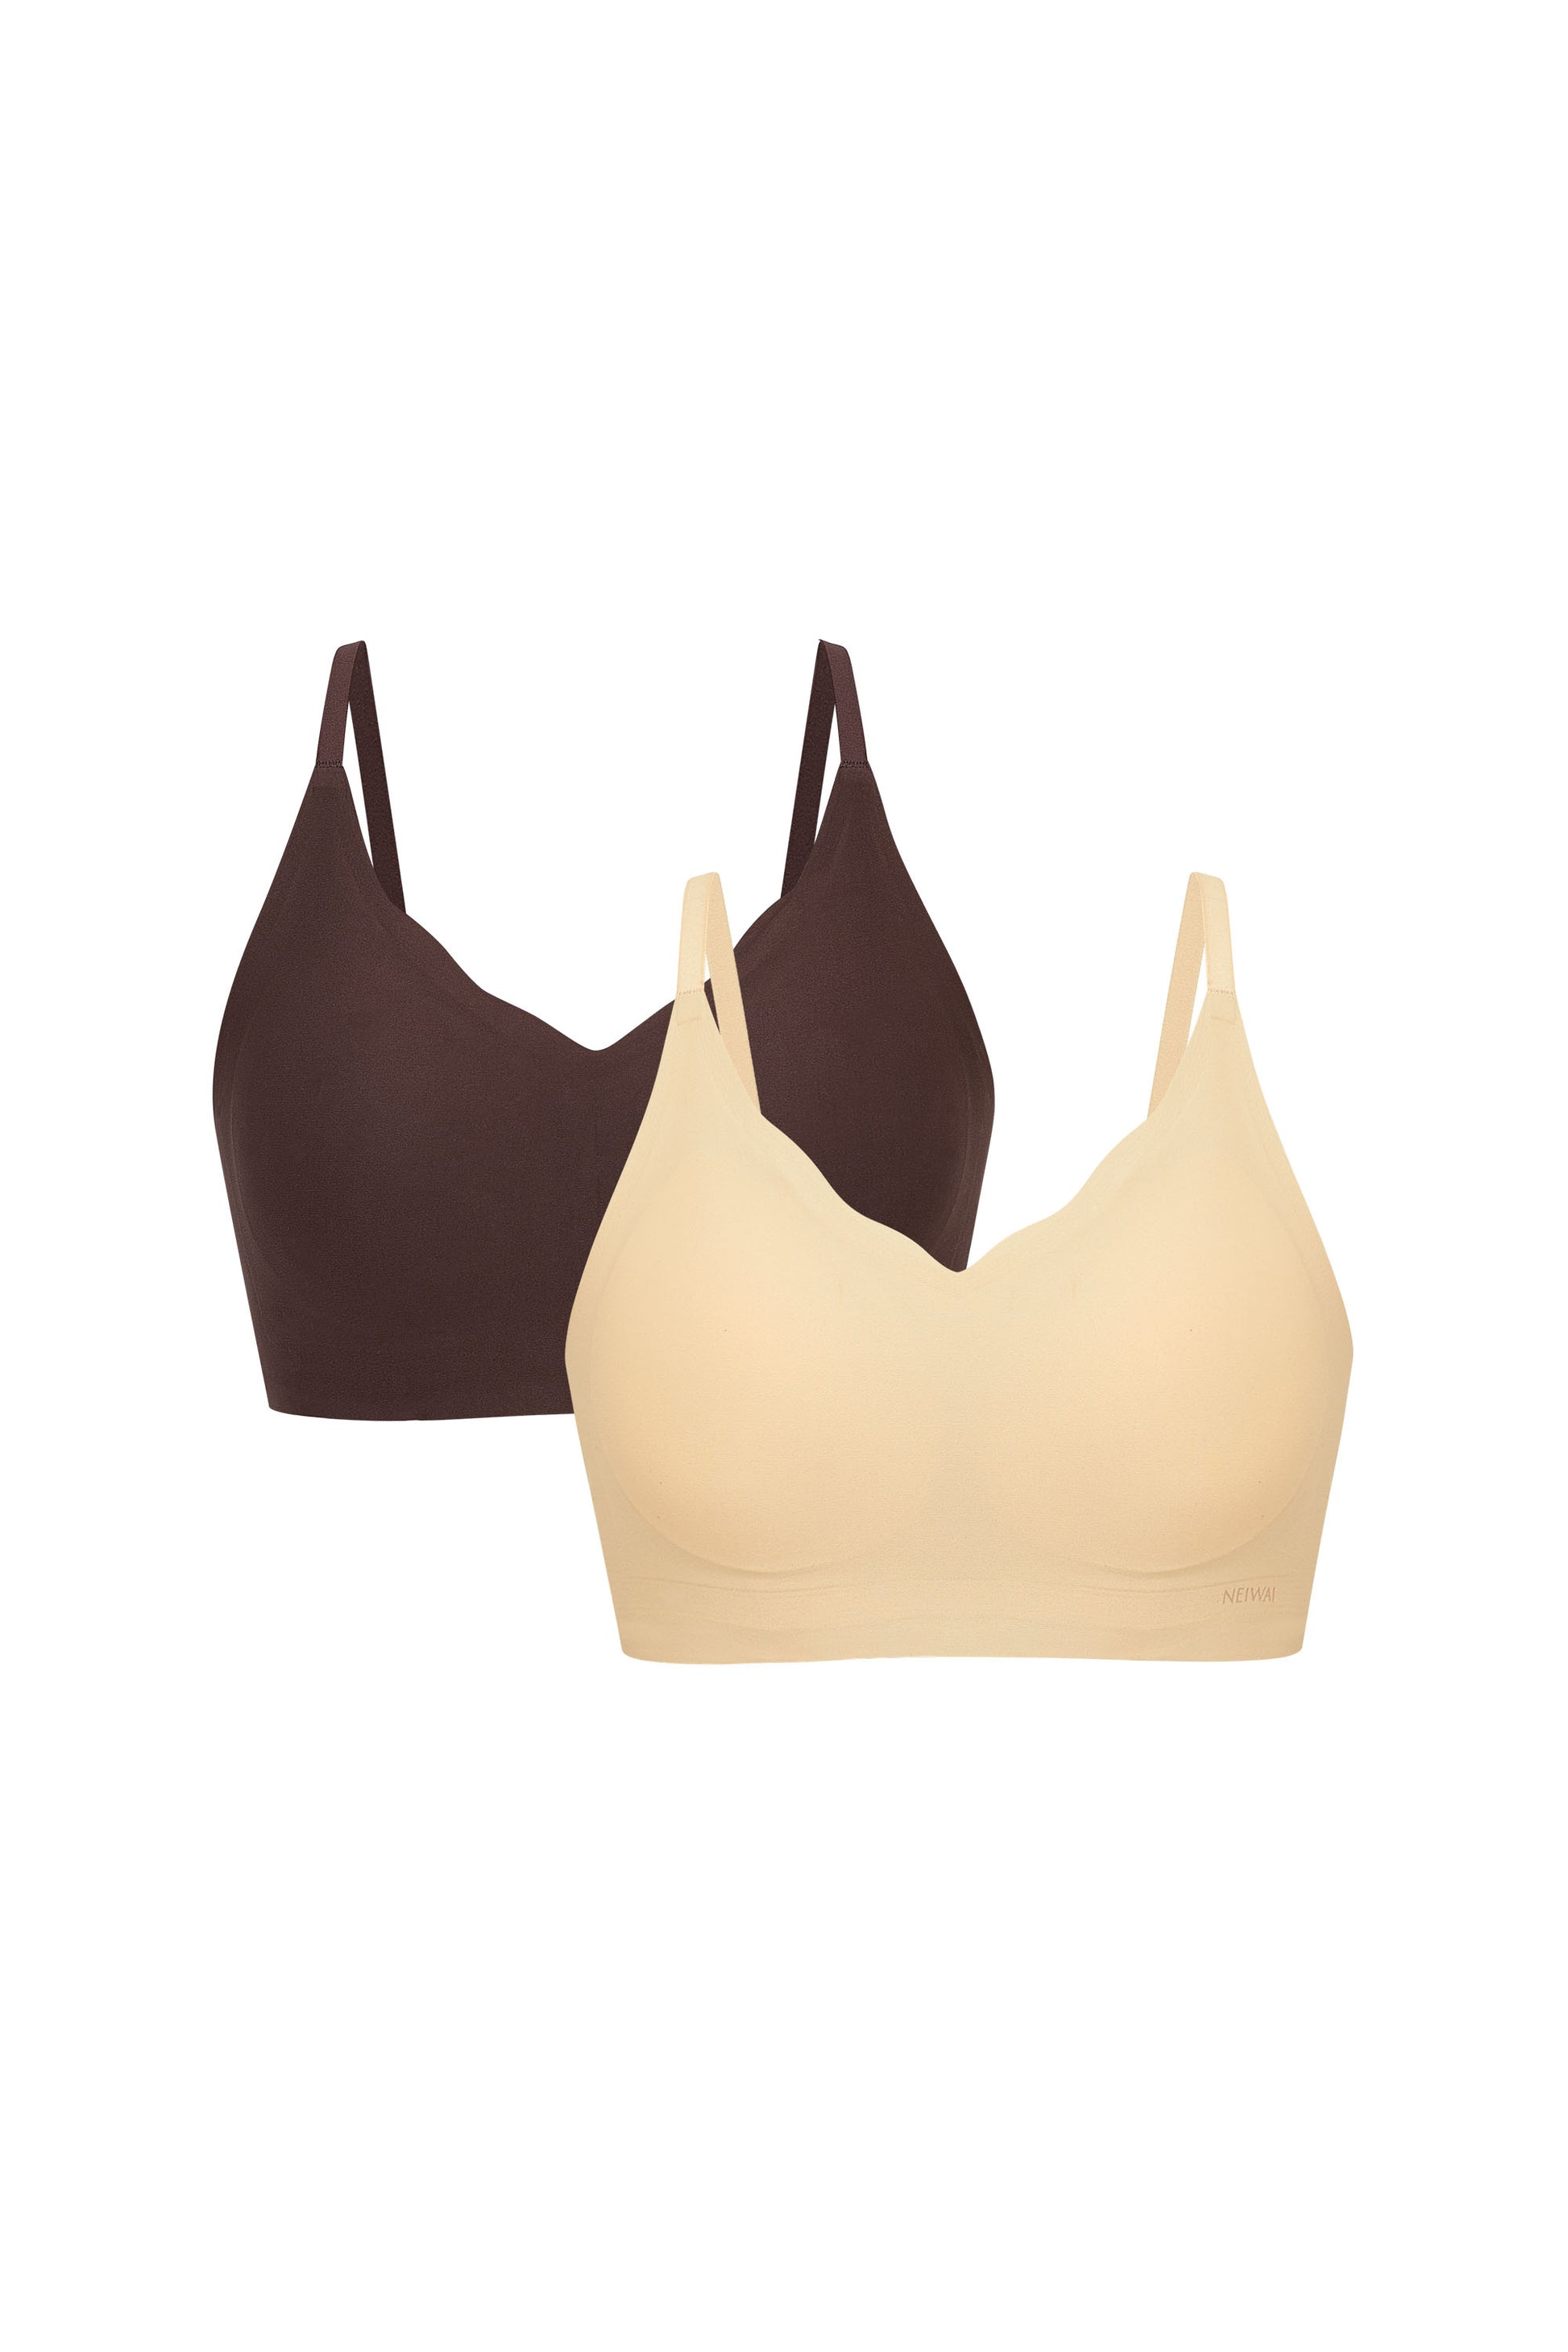 Barely Zero Fixed Cup Wavy Bra Bundle - Extended Sizes